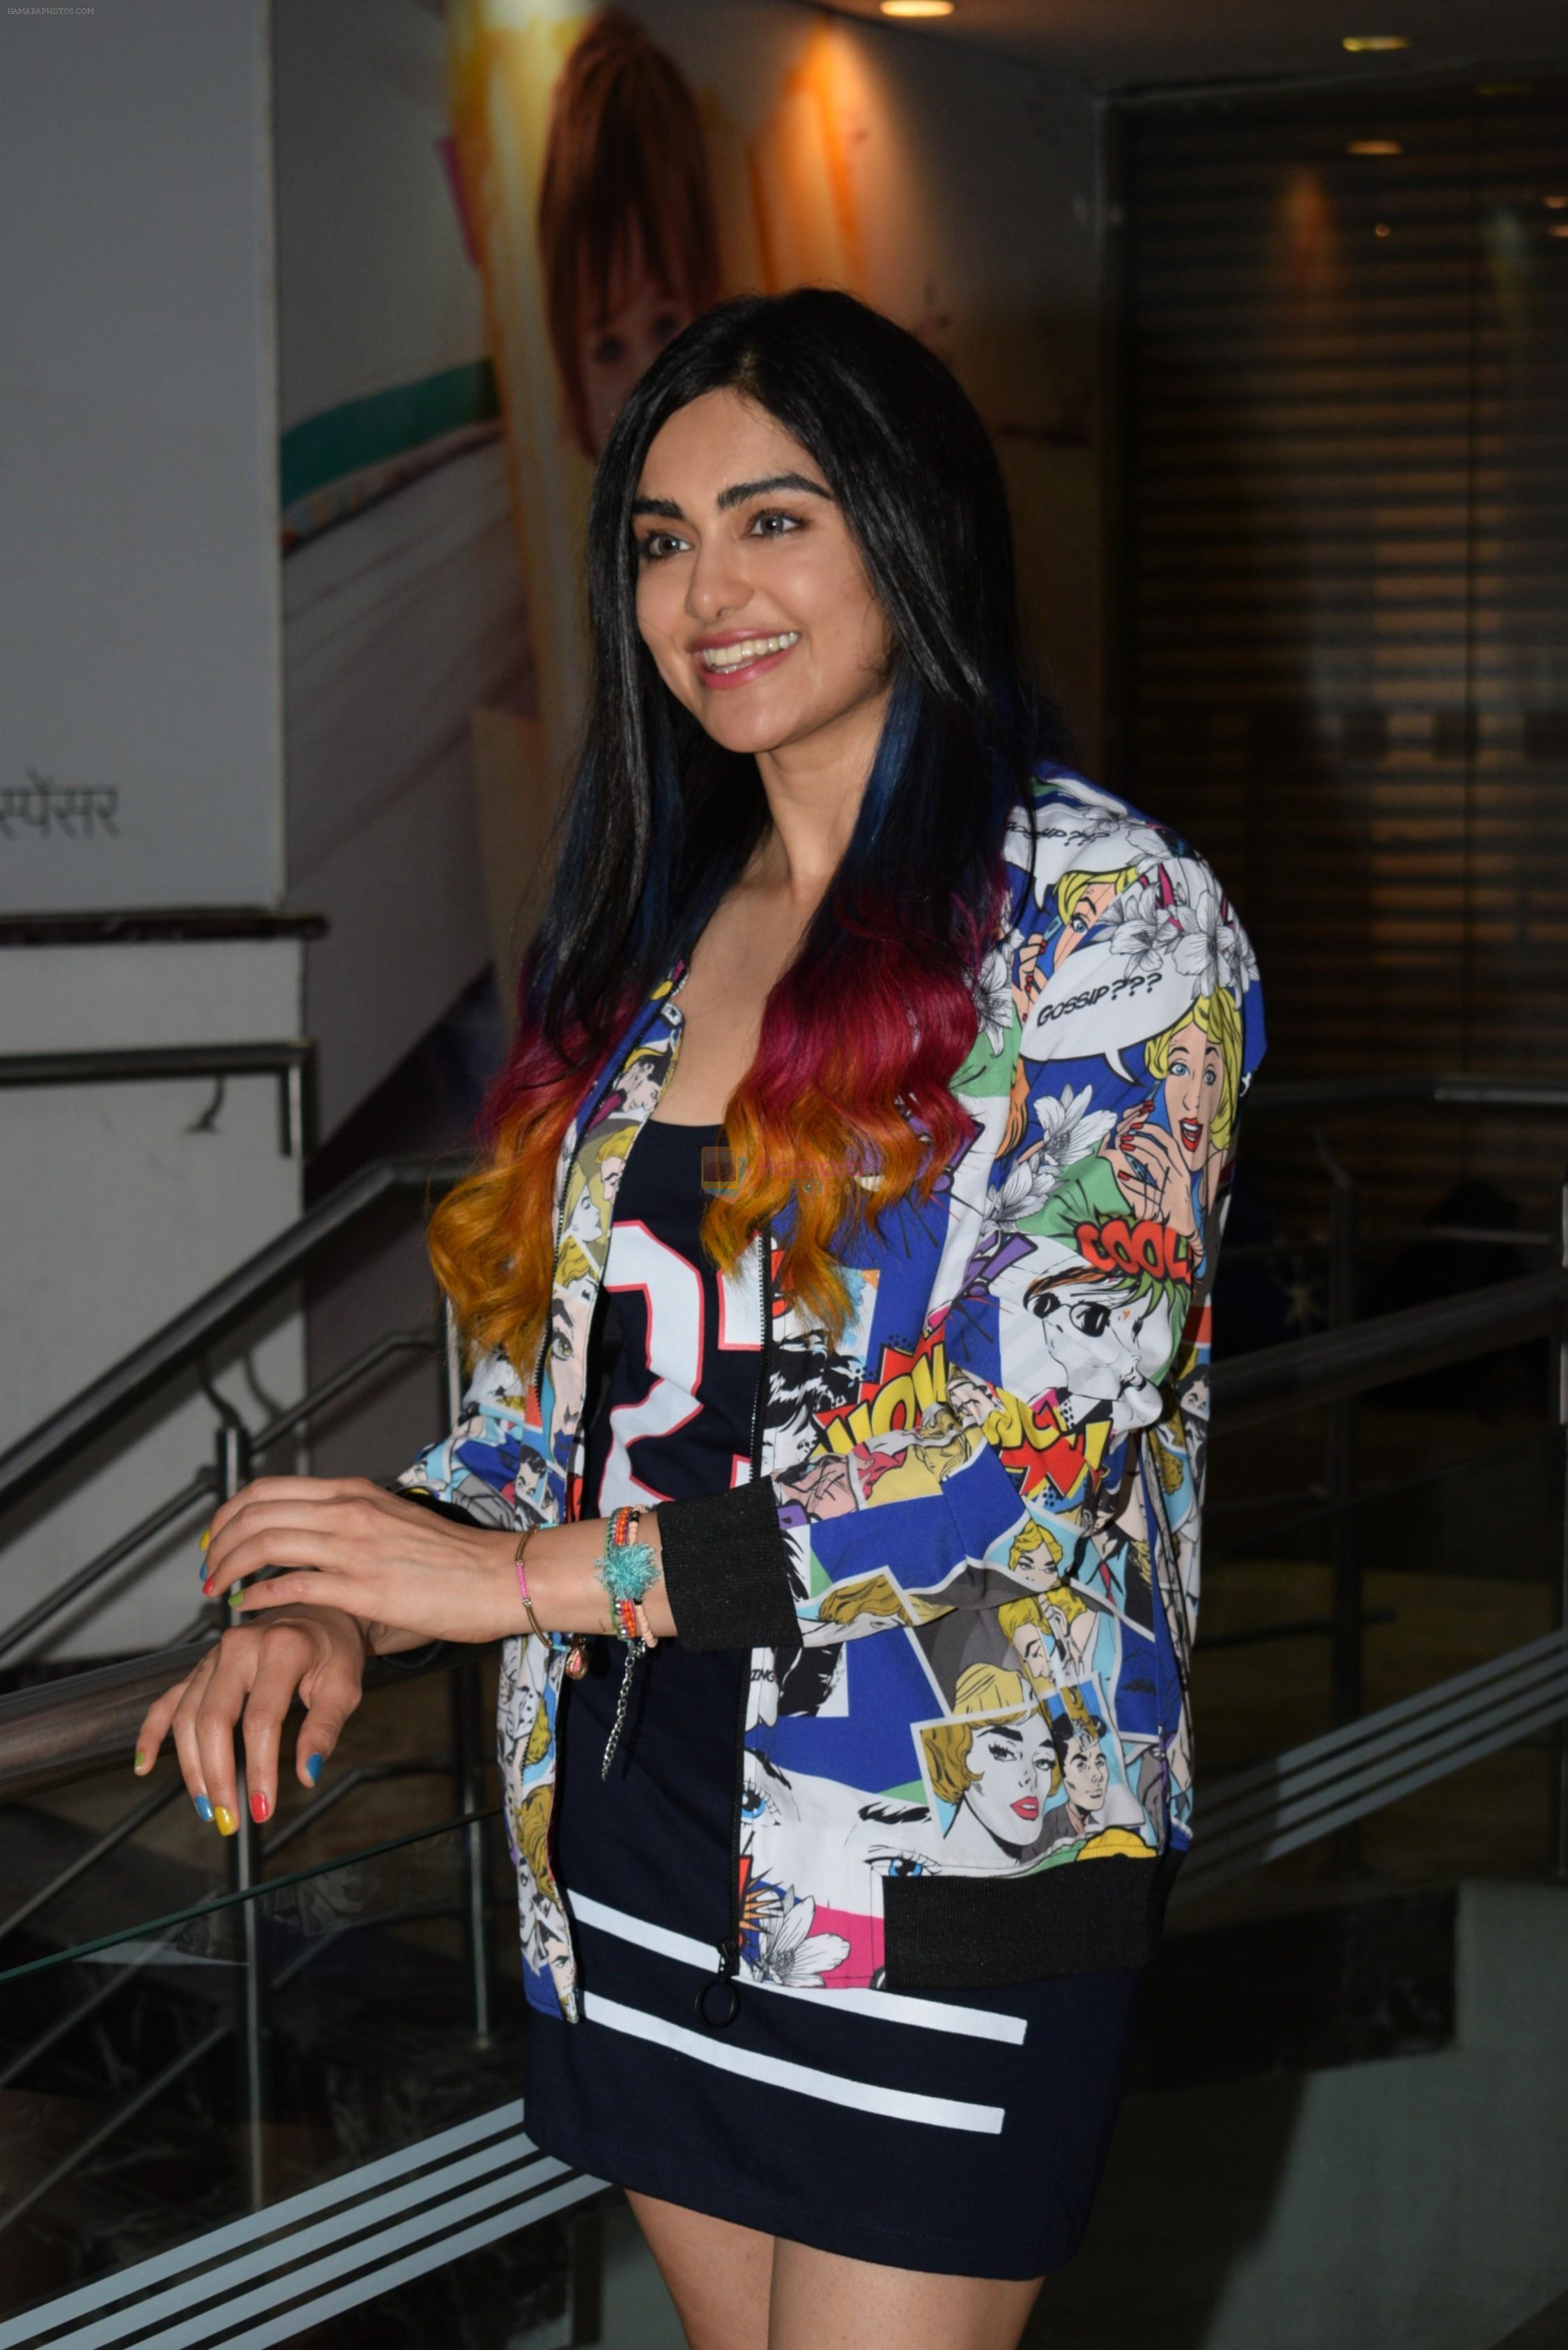 Adah Sharma at the Wrapup party of film Bypass Road in andheri on 20th June 2019